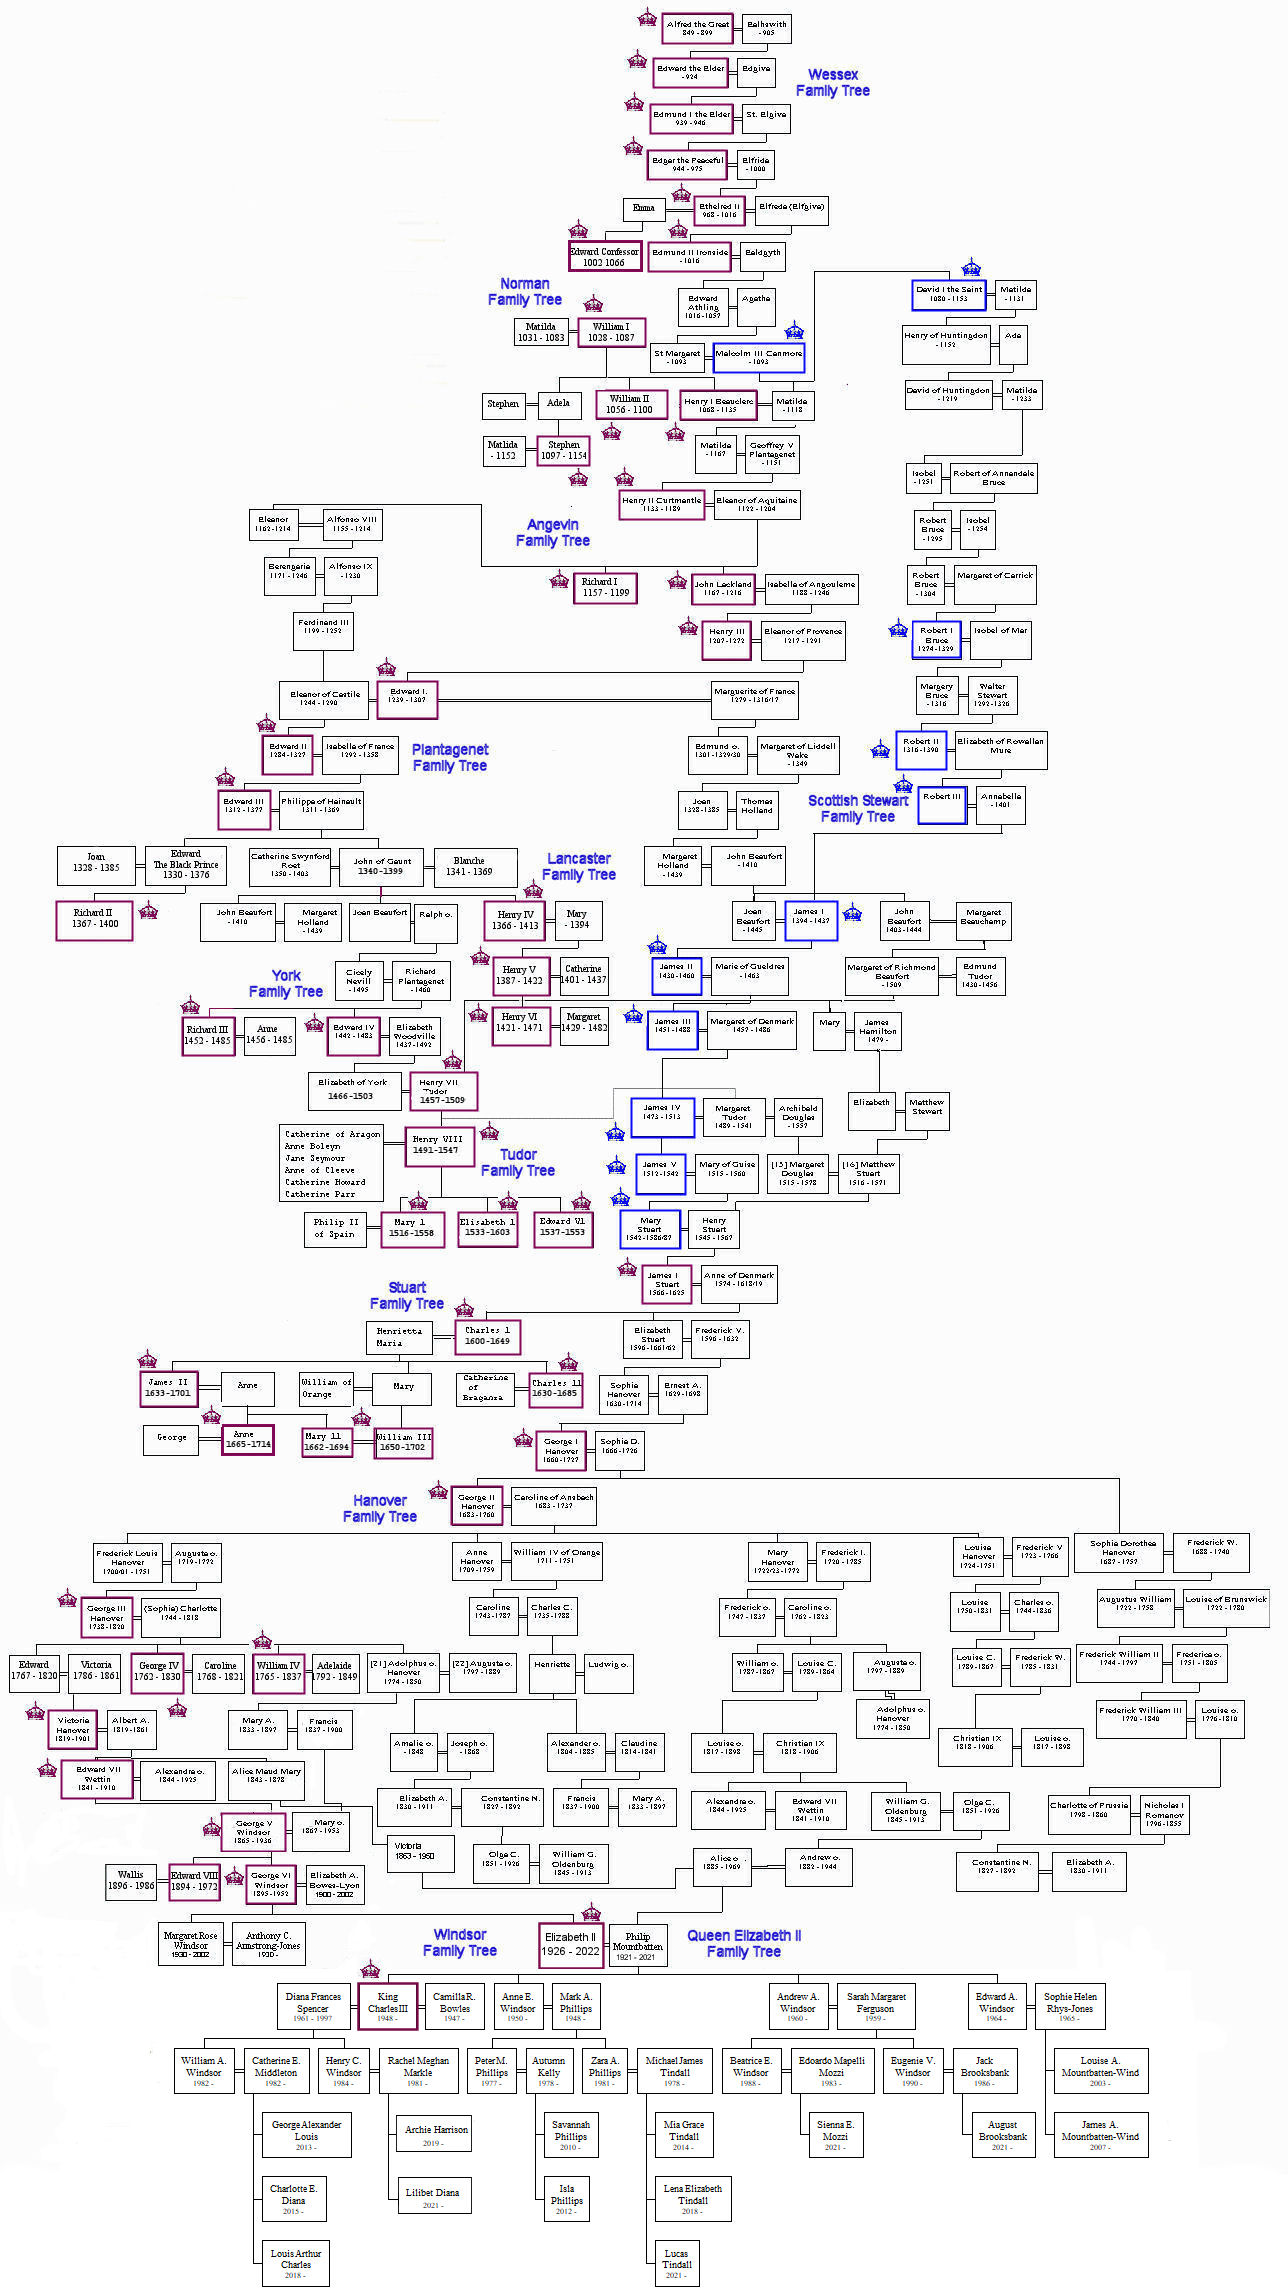 British Royal Family Tree from Alfred the Great